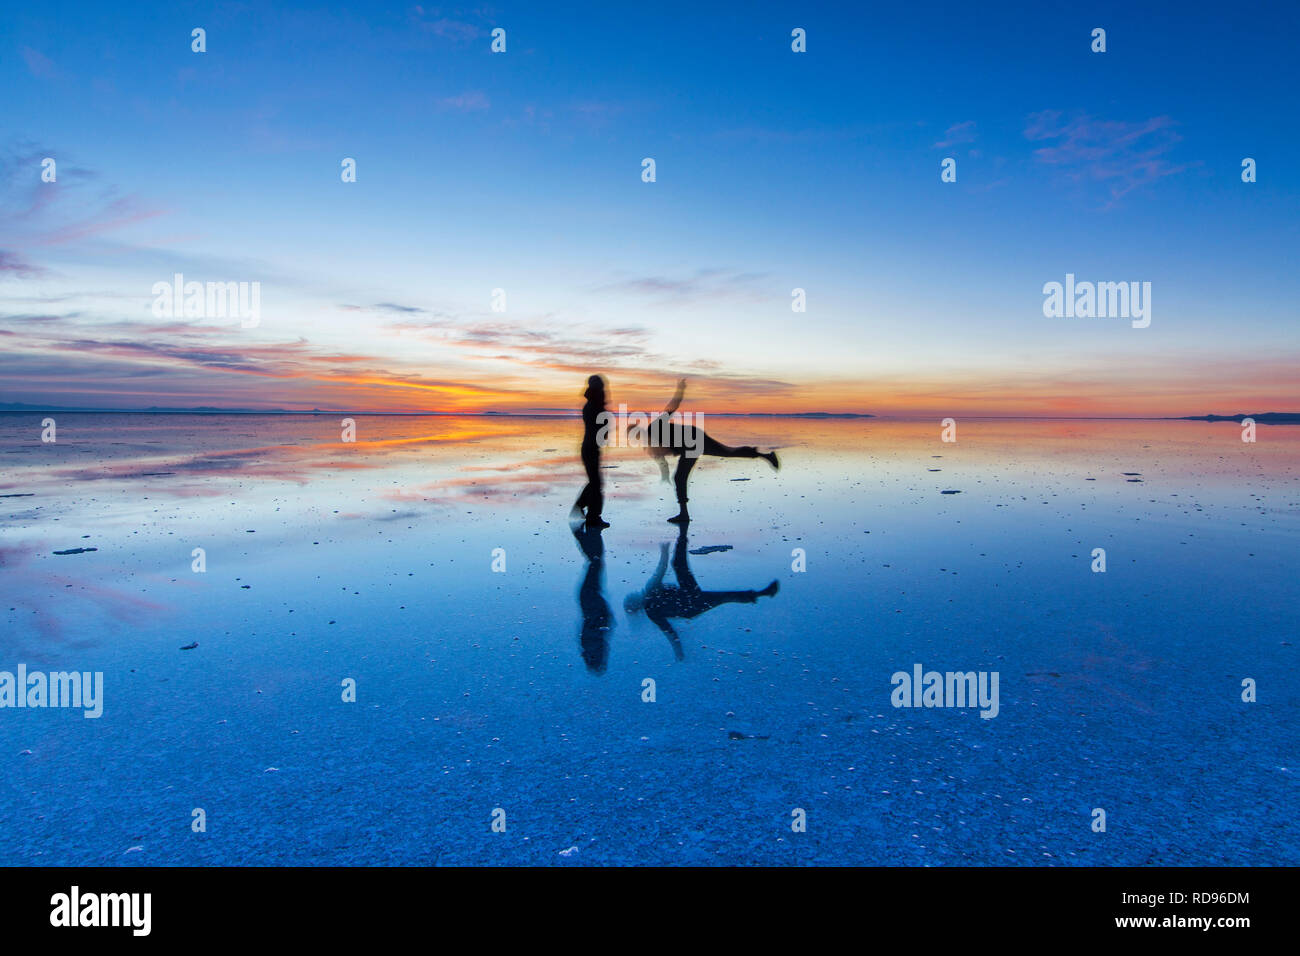 Couple looking to Sunrise at Uyuni saltflats. Sunrise over an infinite horizon in Salar de Uyuni with people reflections in water, a colorful scenery Stock Photo